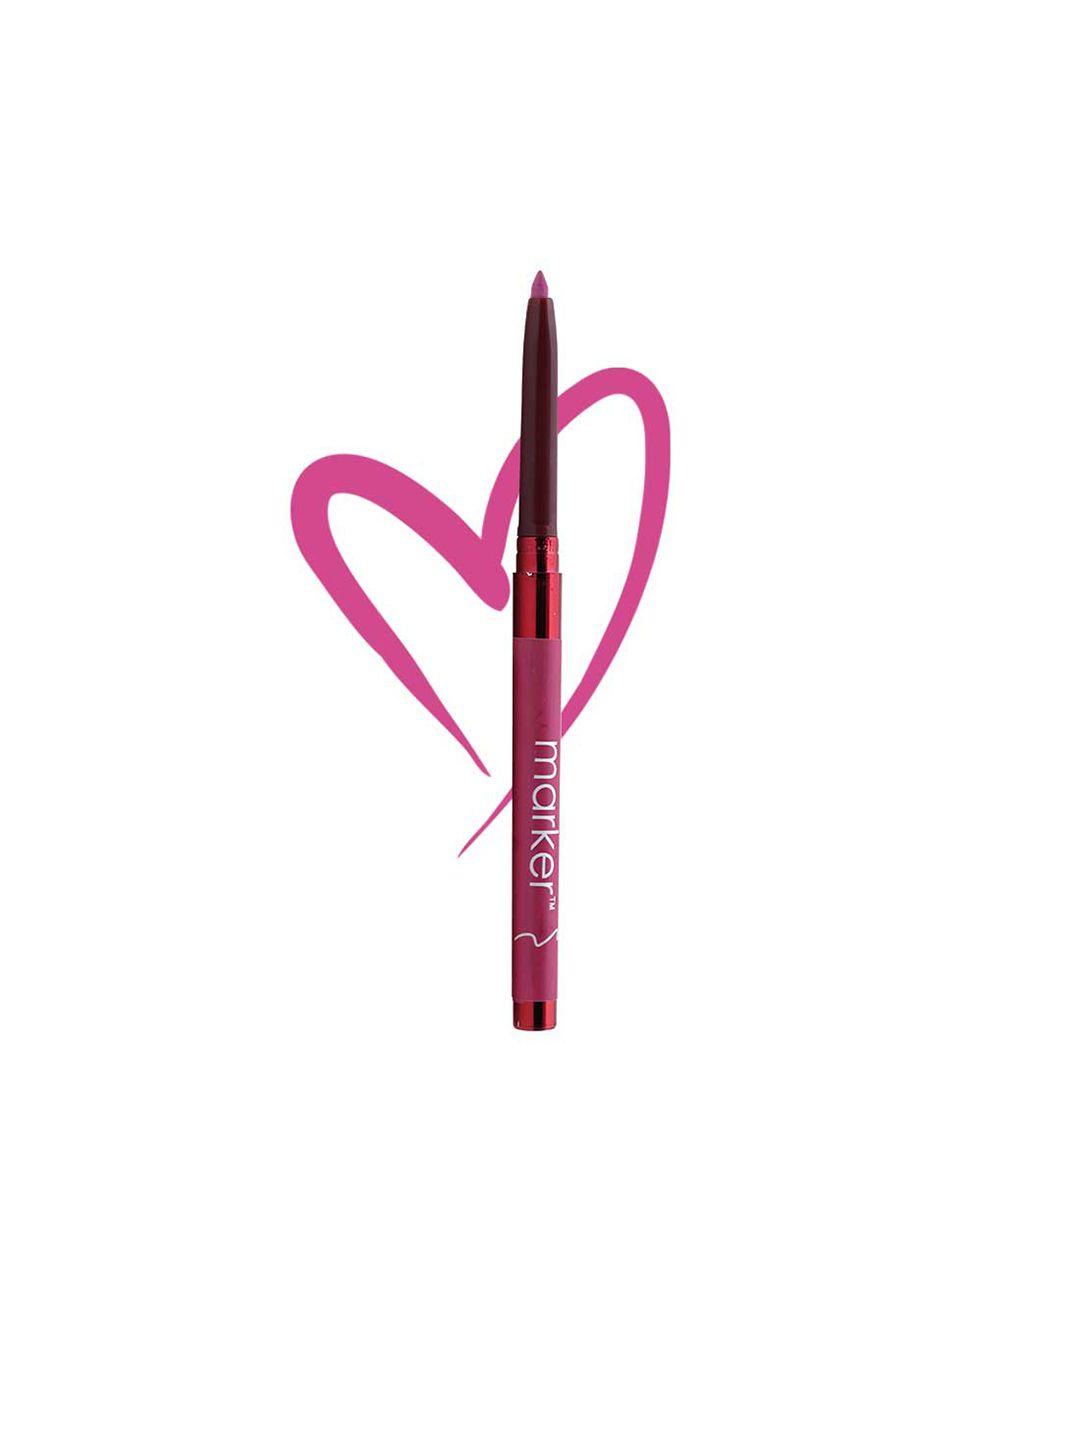 beautyrelay london outline the lips long-lasting lip liner with vitamin e 0.27g - nude vibes